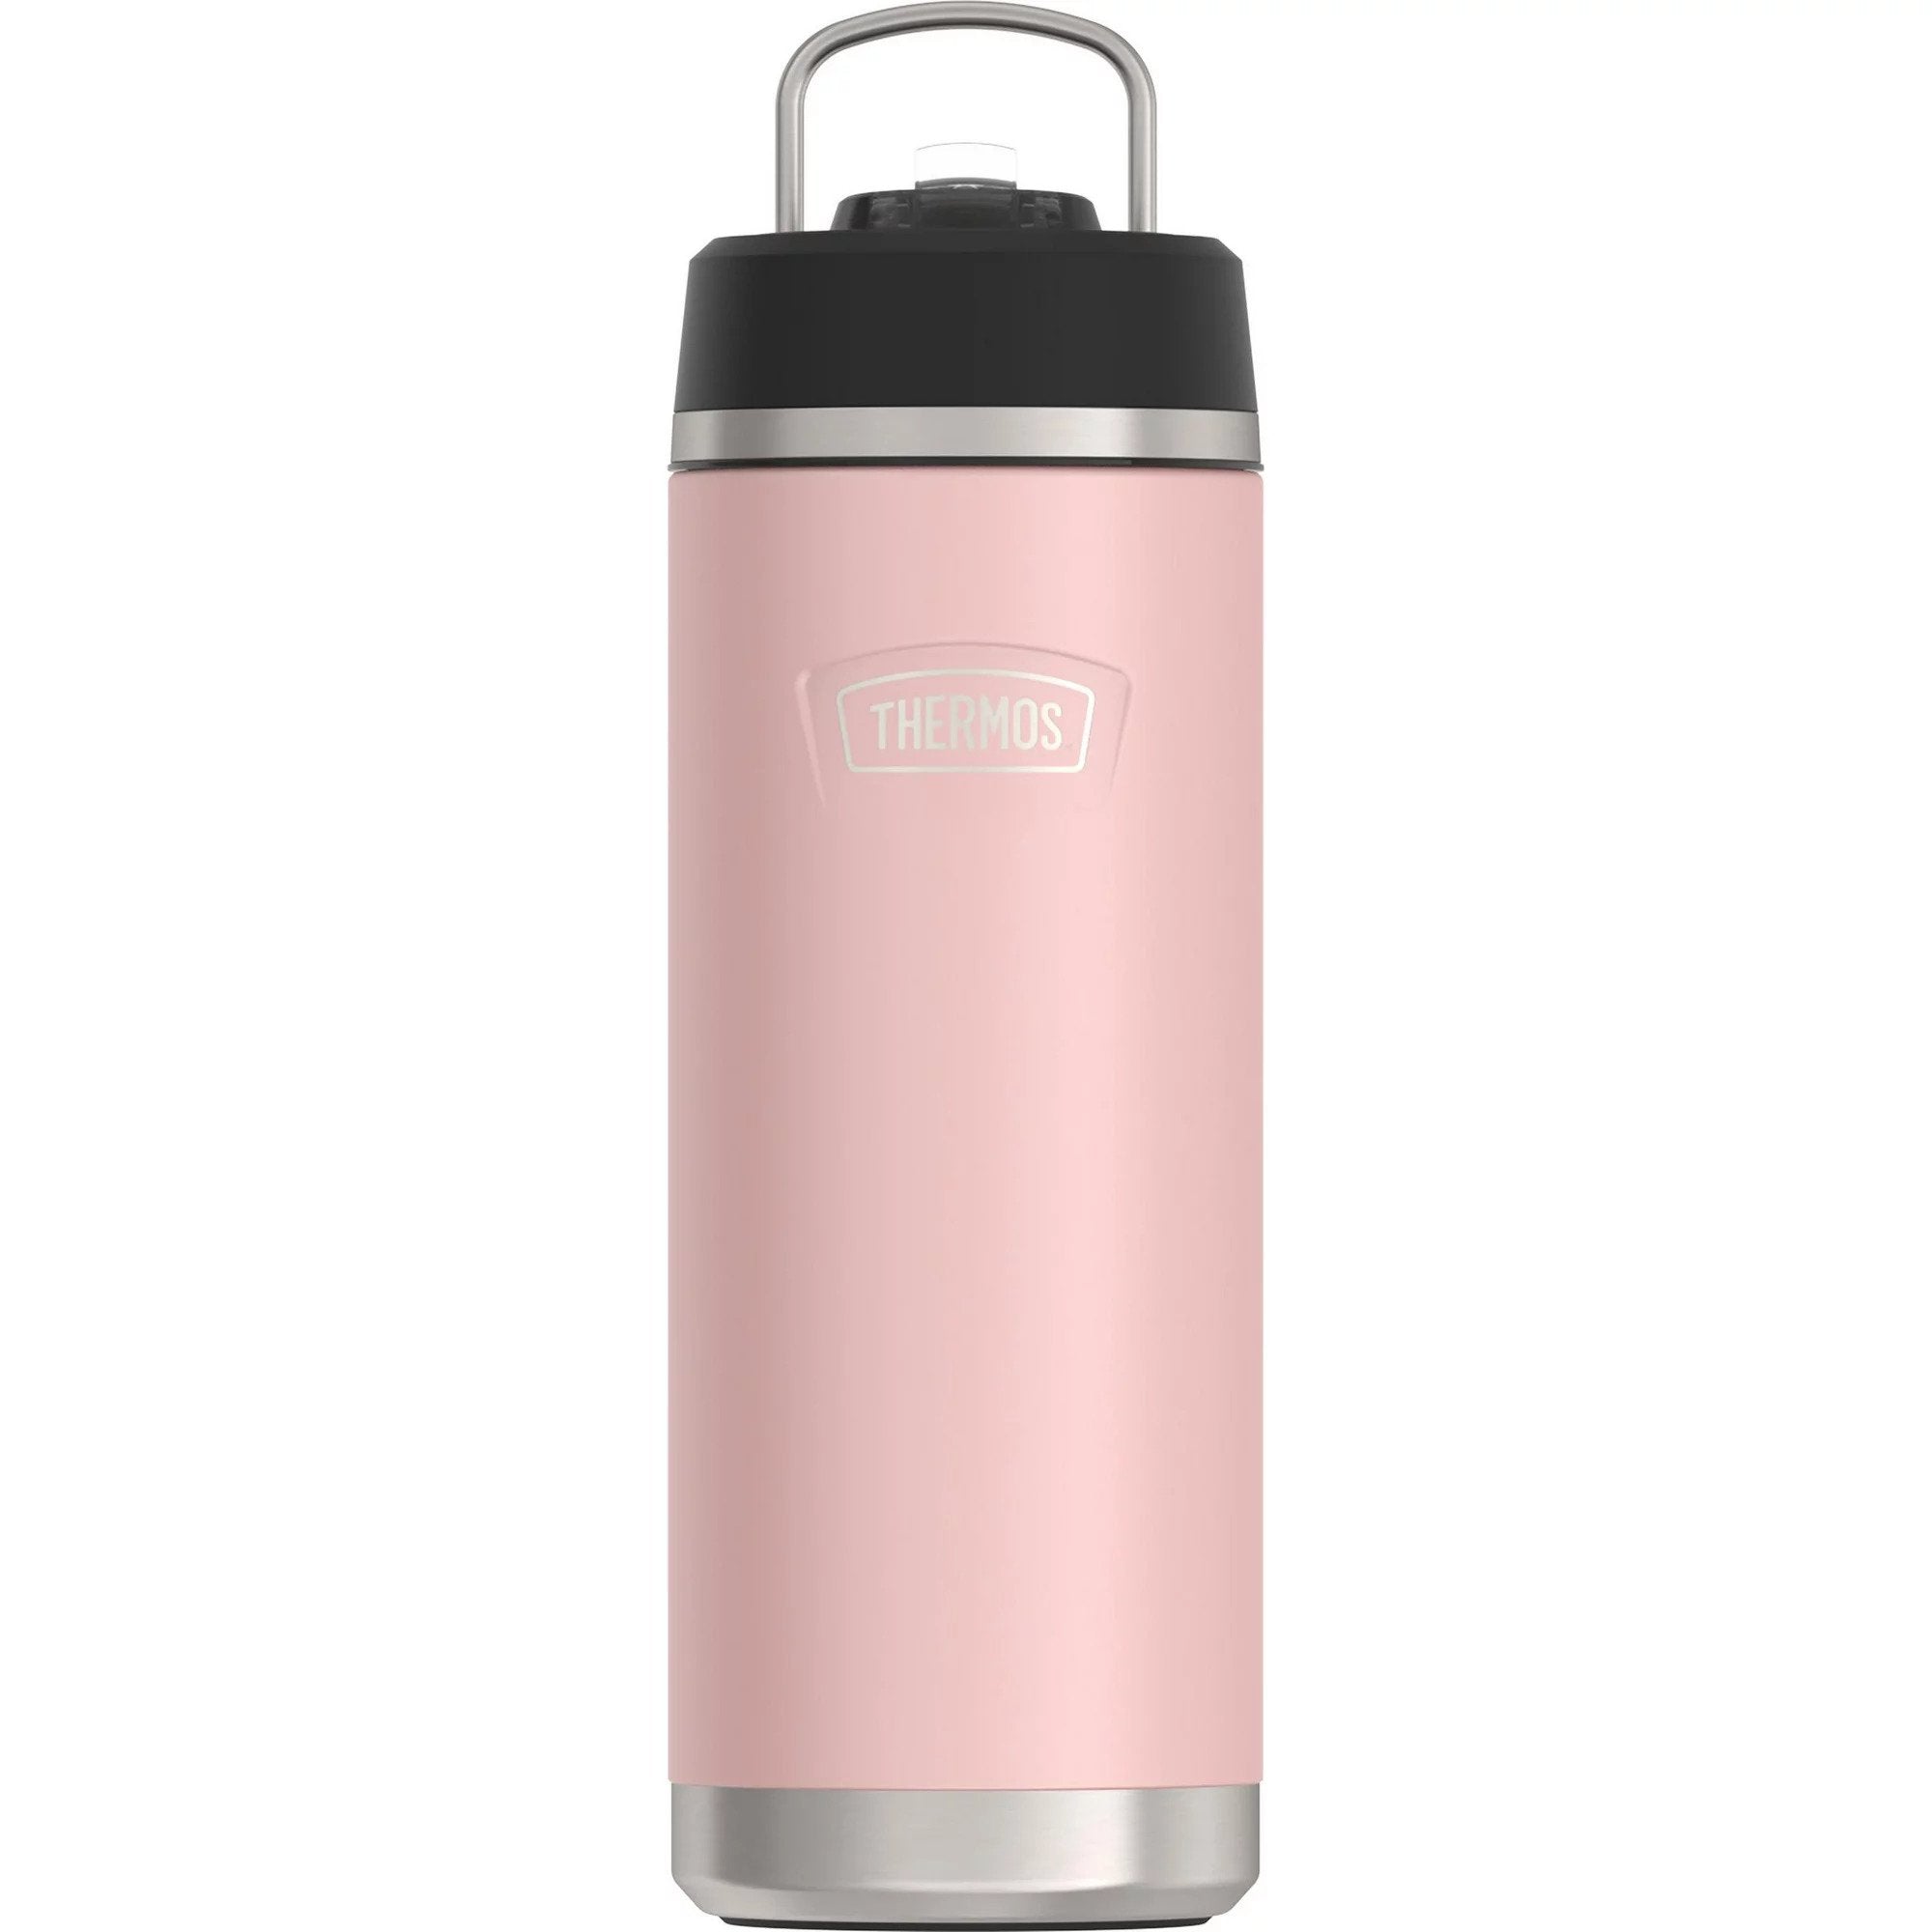 Thermos 24 oz. Vacuum Insulated Stainless Steel Water Bottle - Pink Thermos